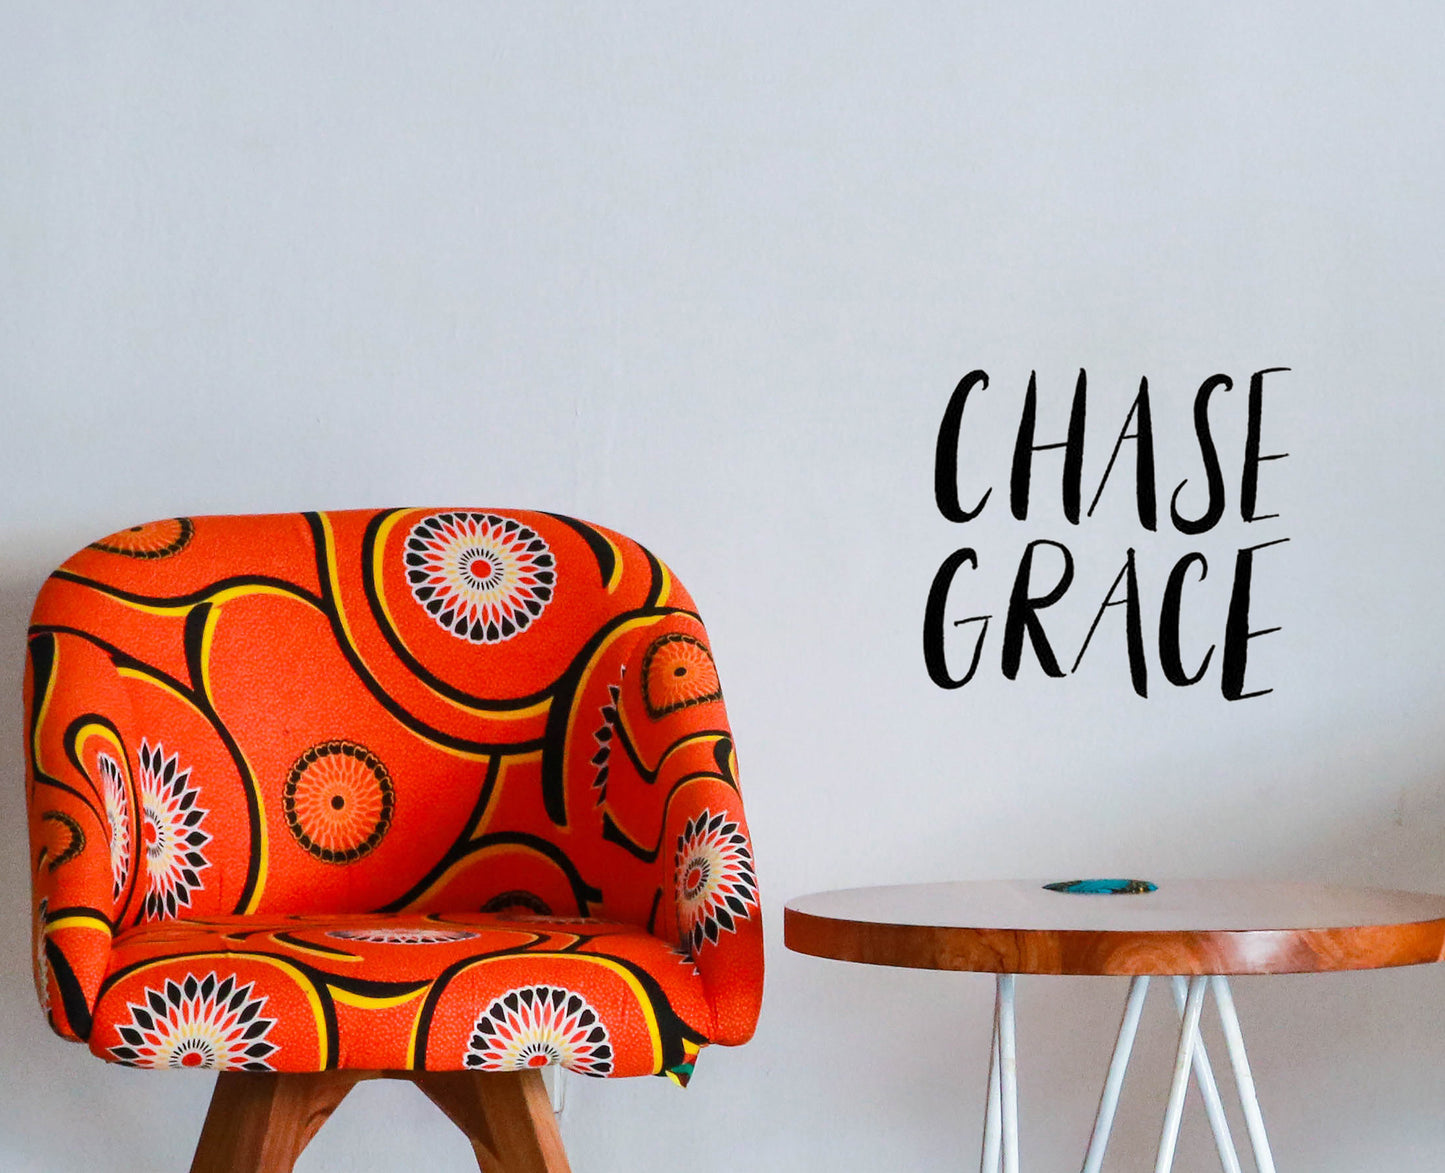 Chase Grace Christian Quote Scripture Vinyl Decal Sticker